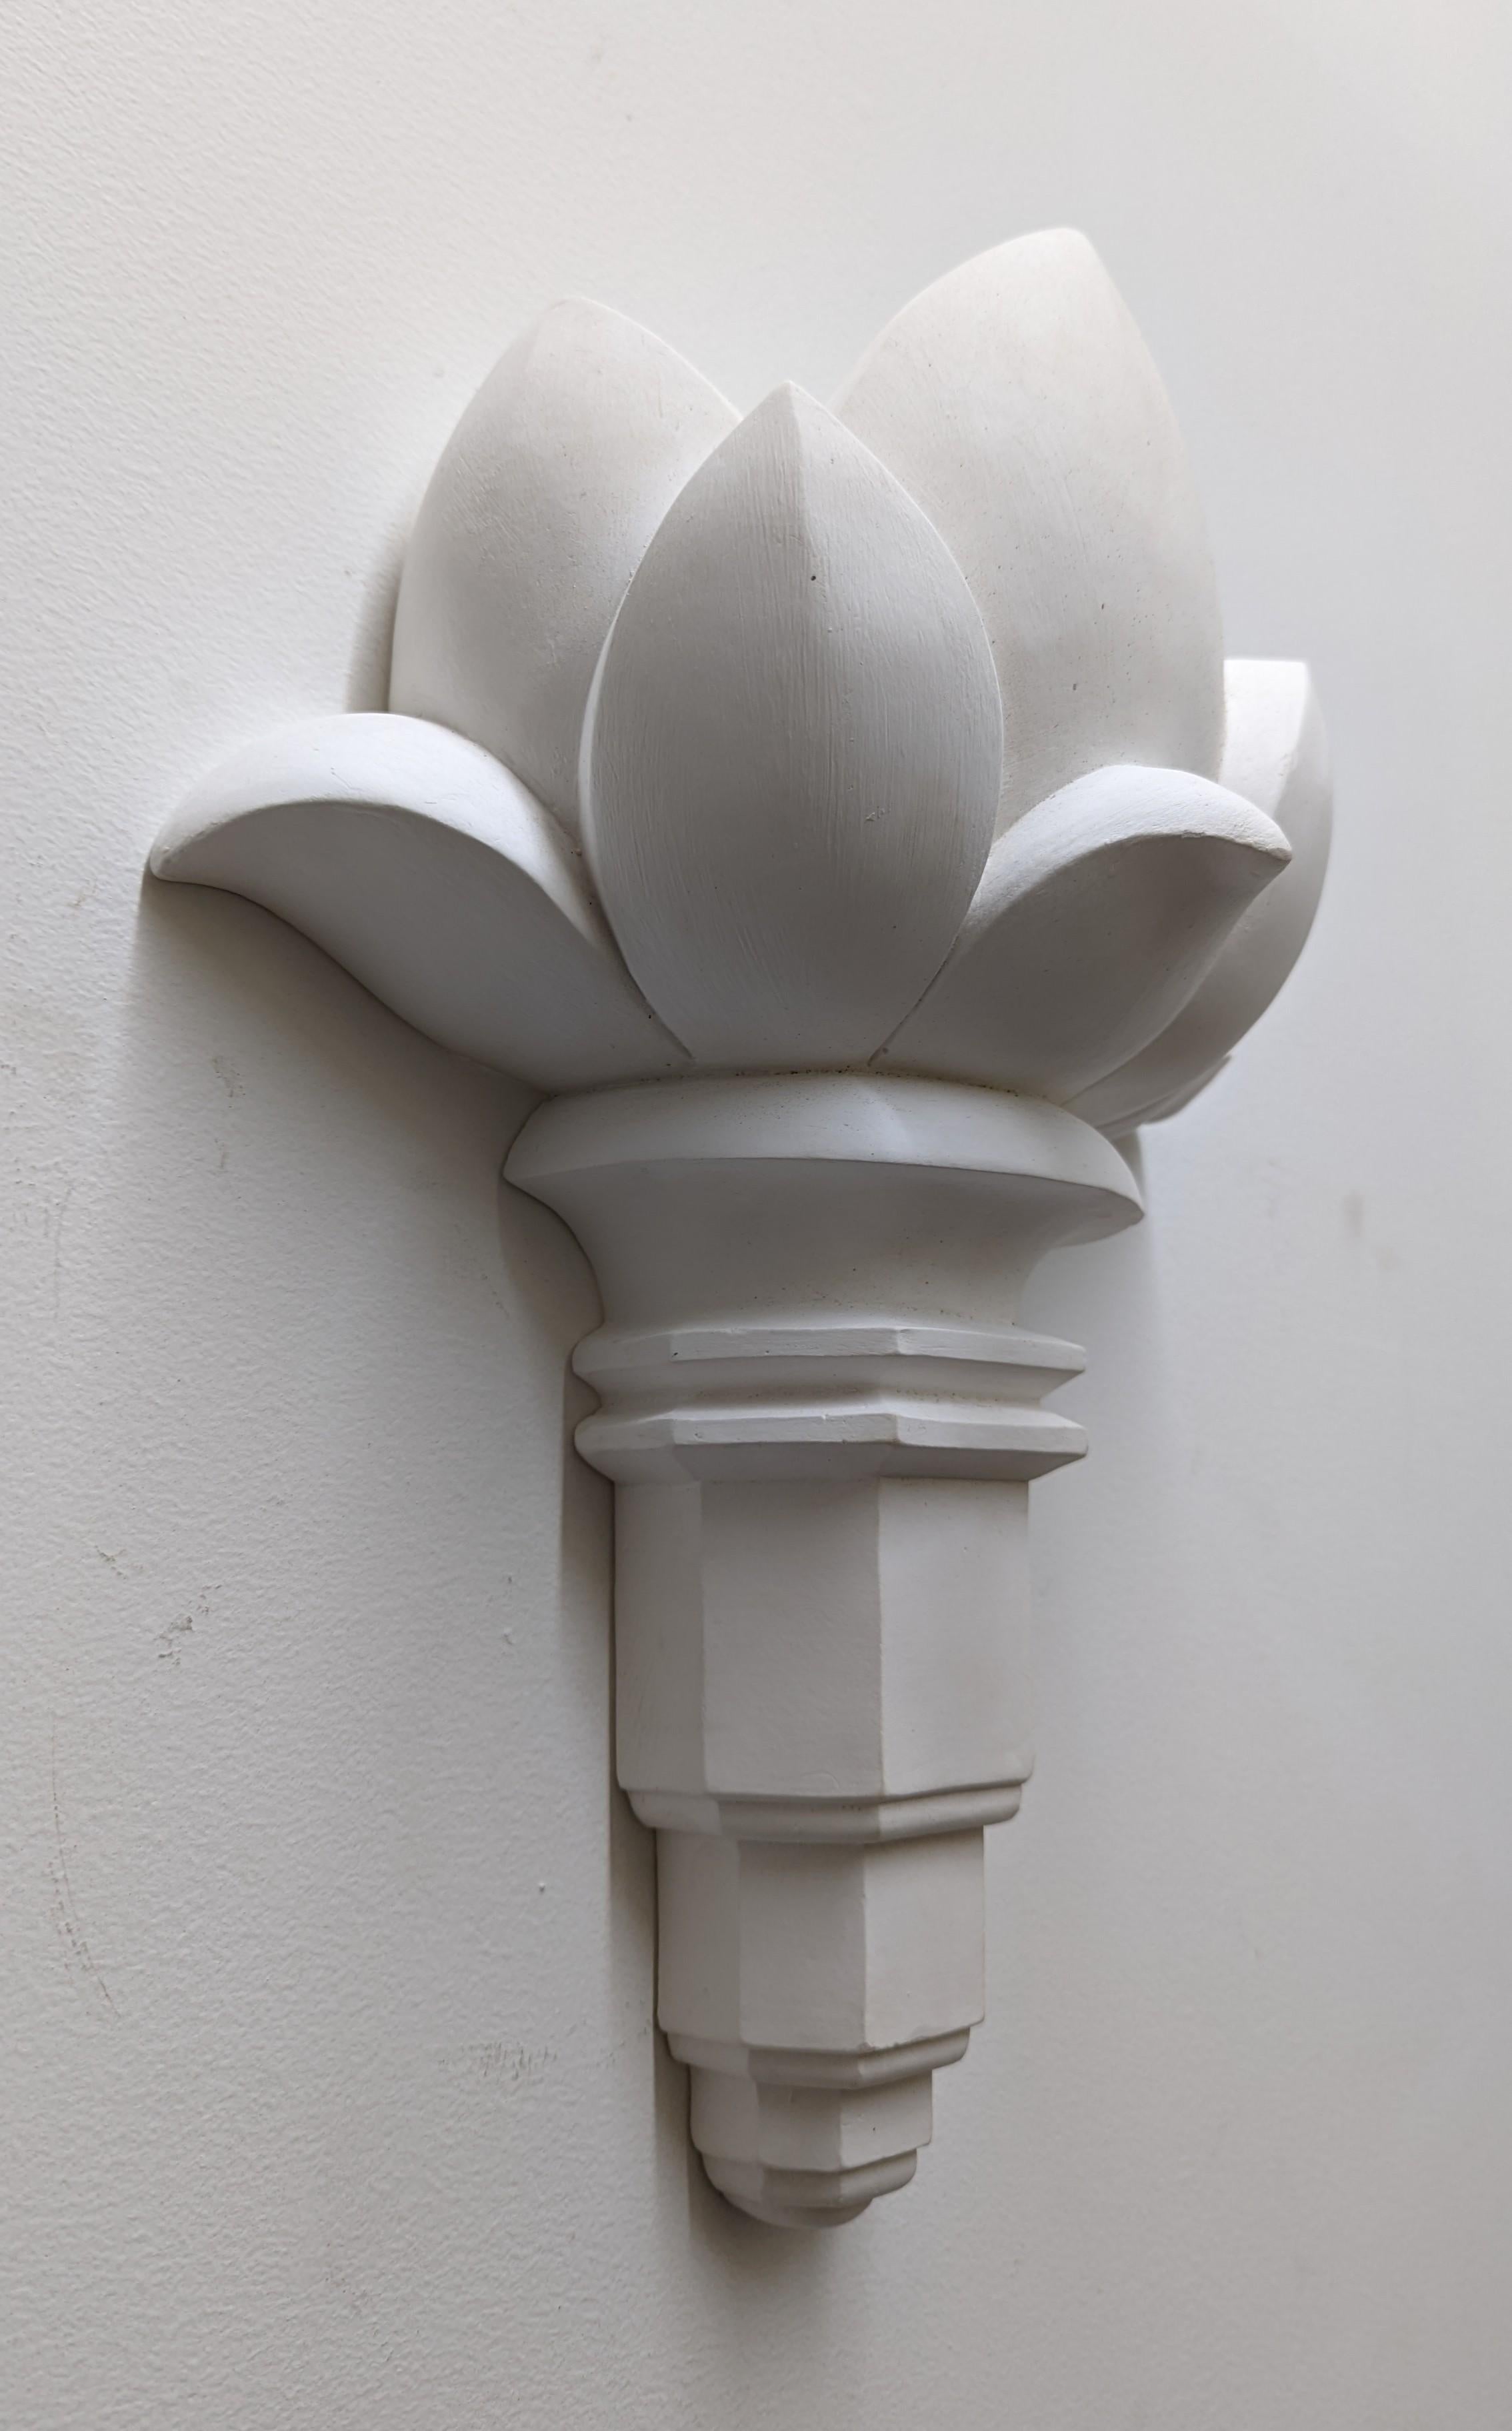 Hand-Crafted French Art Deco Wall Sconces by Bourgeois Boheme Atelier